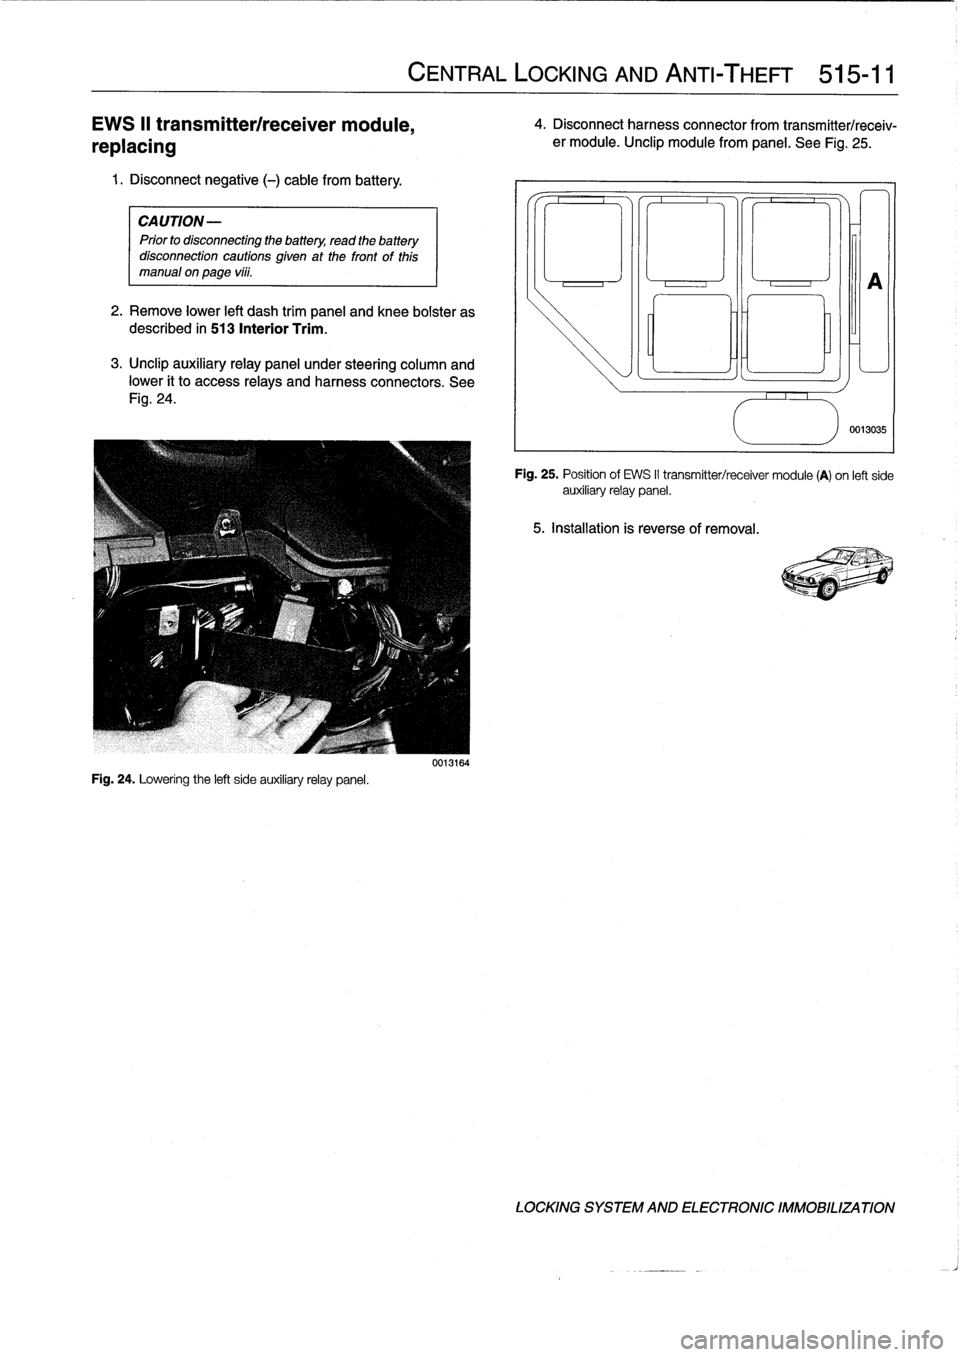 BMW 318i 1997 E36 Service Manual 
EWS
II
transmitterlreceiver
module,

replacing

1
.
Disconnect
negative
(-)
cable
from
battery
.

CAUTION-

Prior
to
disconnectiog
the
battery,
read
the
battery
disconnection
cautions
given
at
the
fr